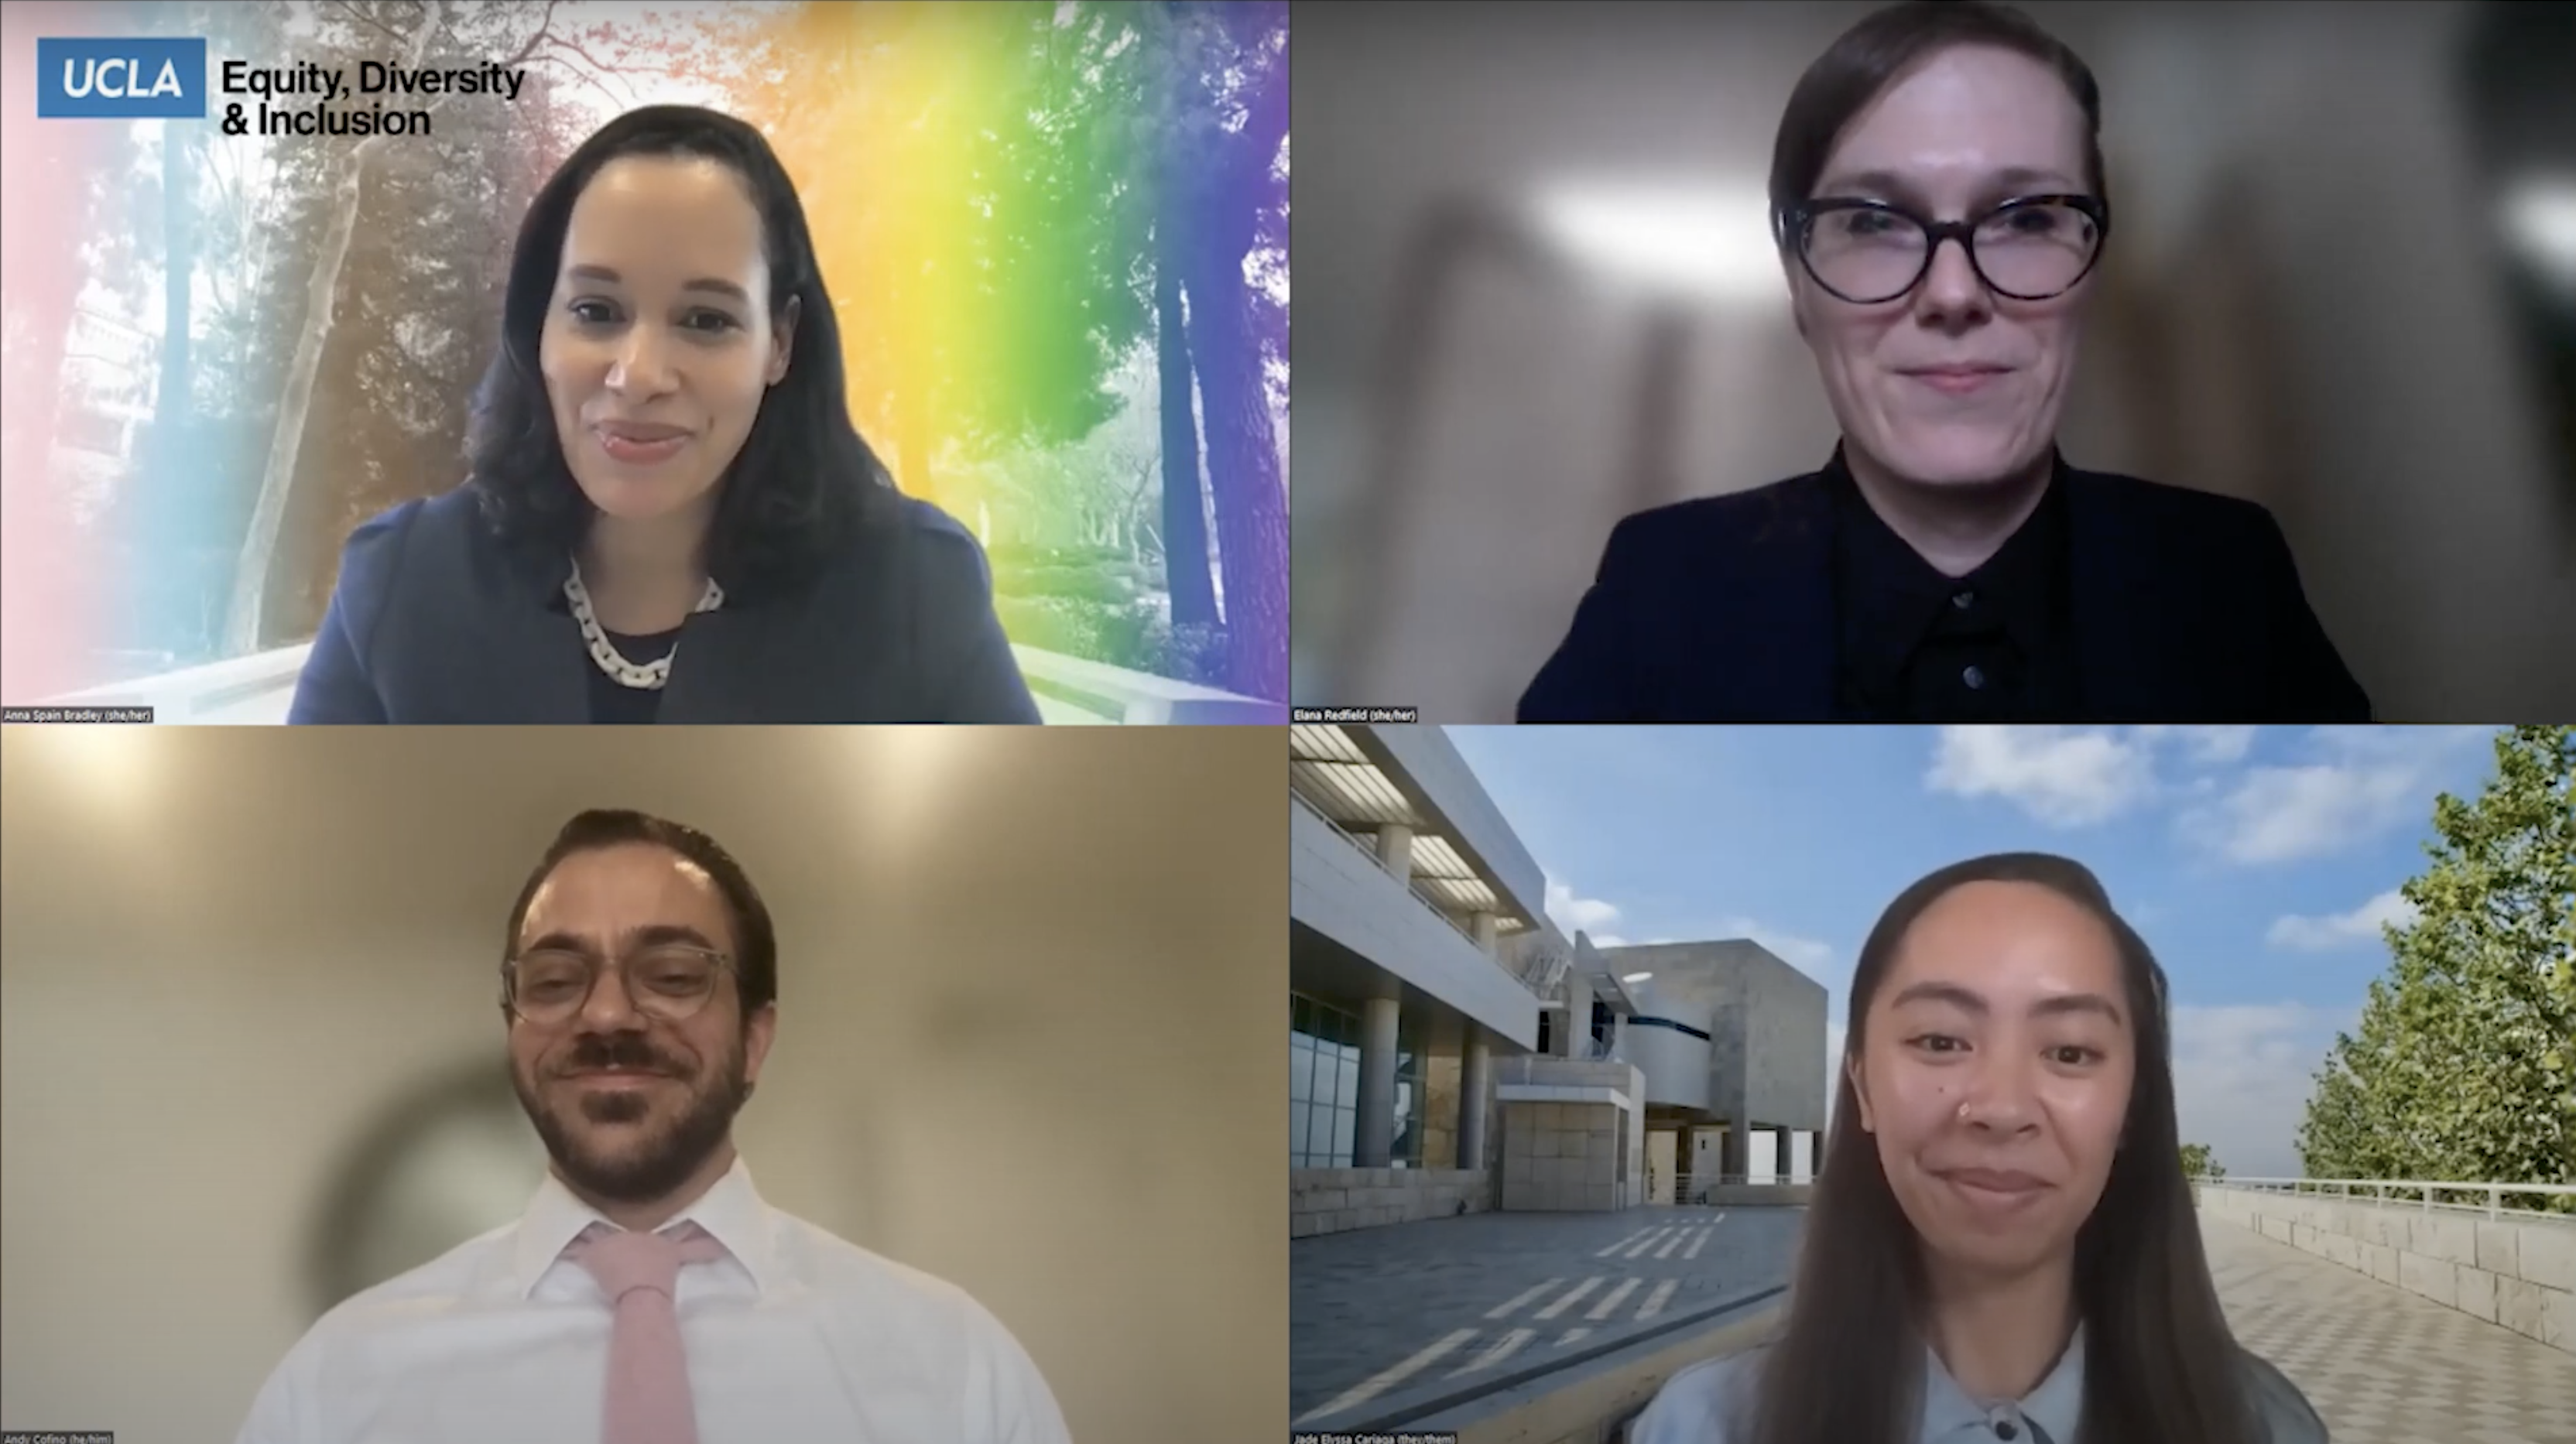 Video – EDI Signature Topics: “The Changing Landscape of Gender Recognition in America”